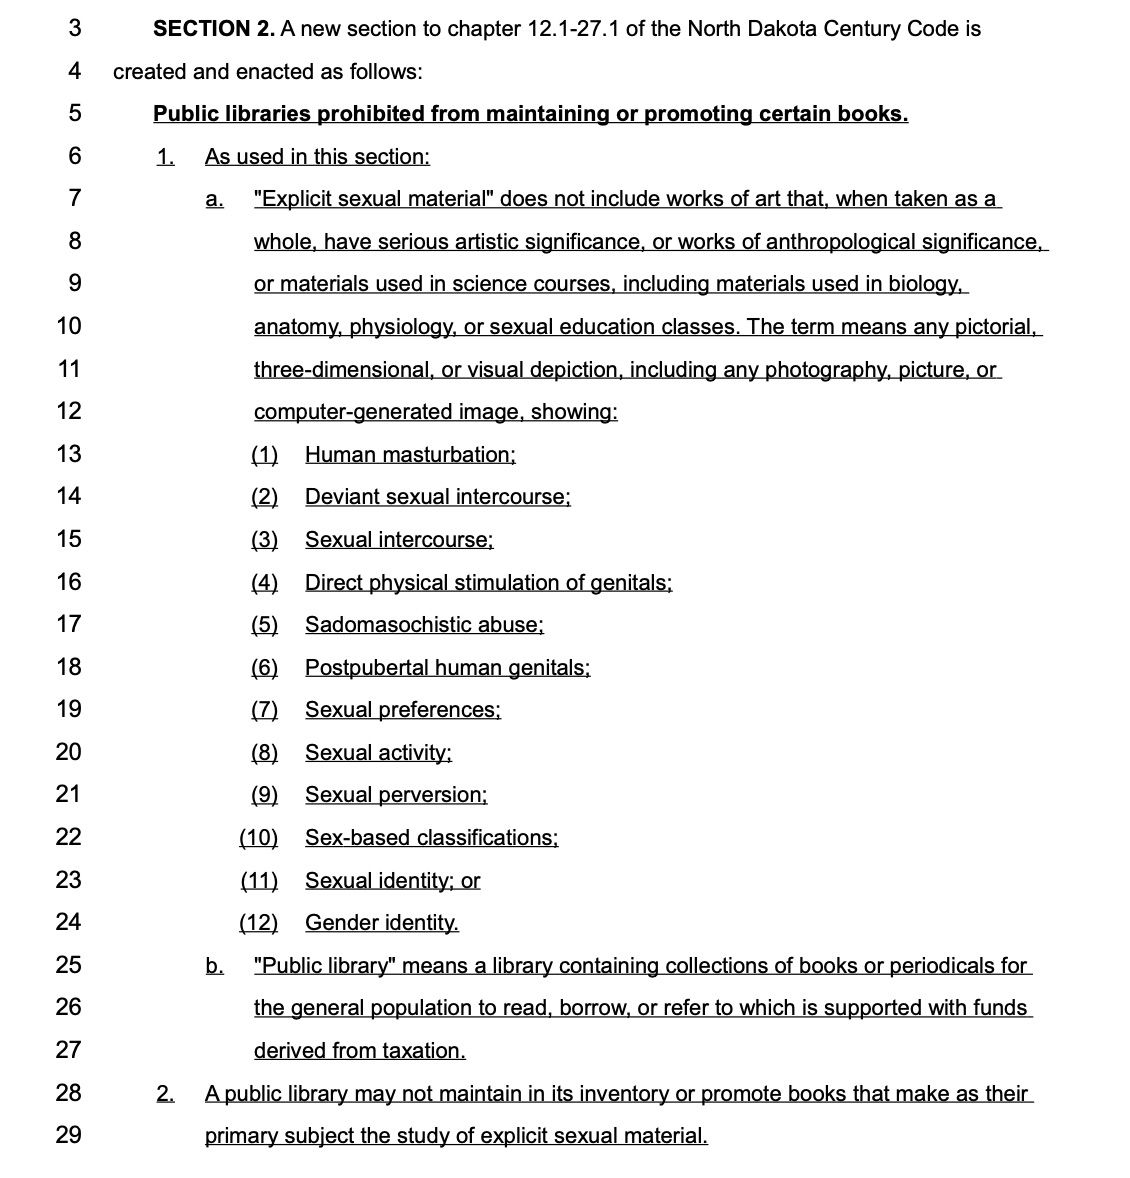 Text of the north dakota house bill 1205, outlining hat is not allowed in public libraries. 